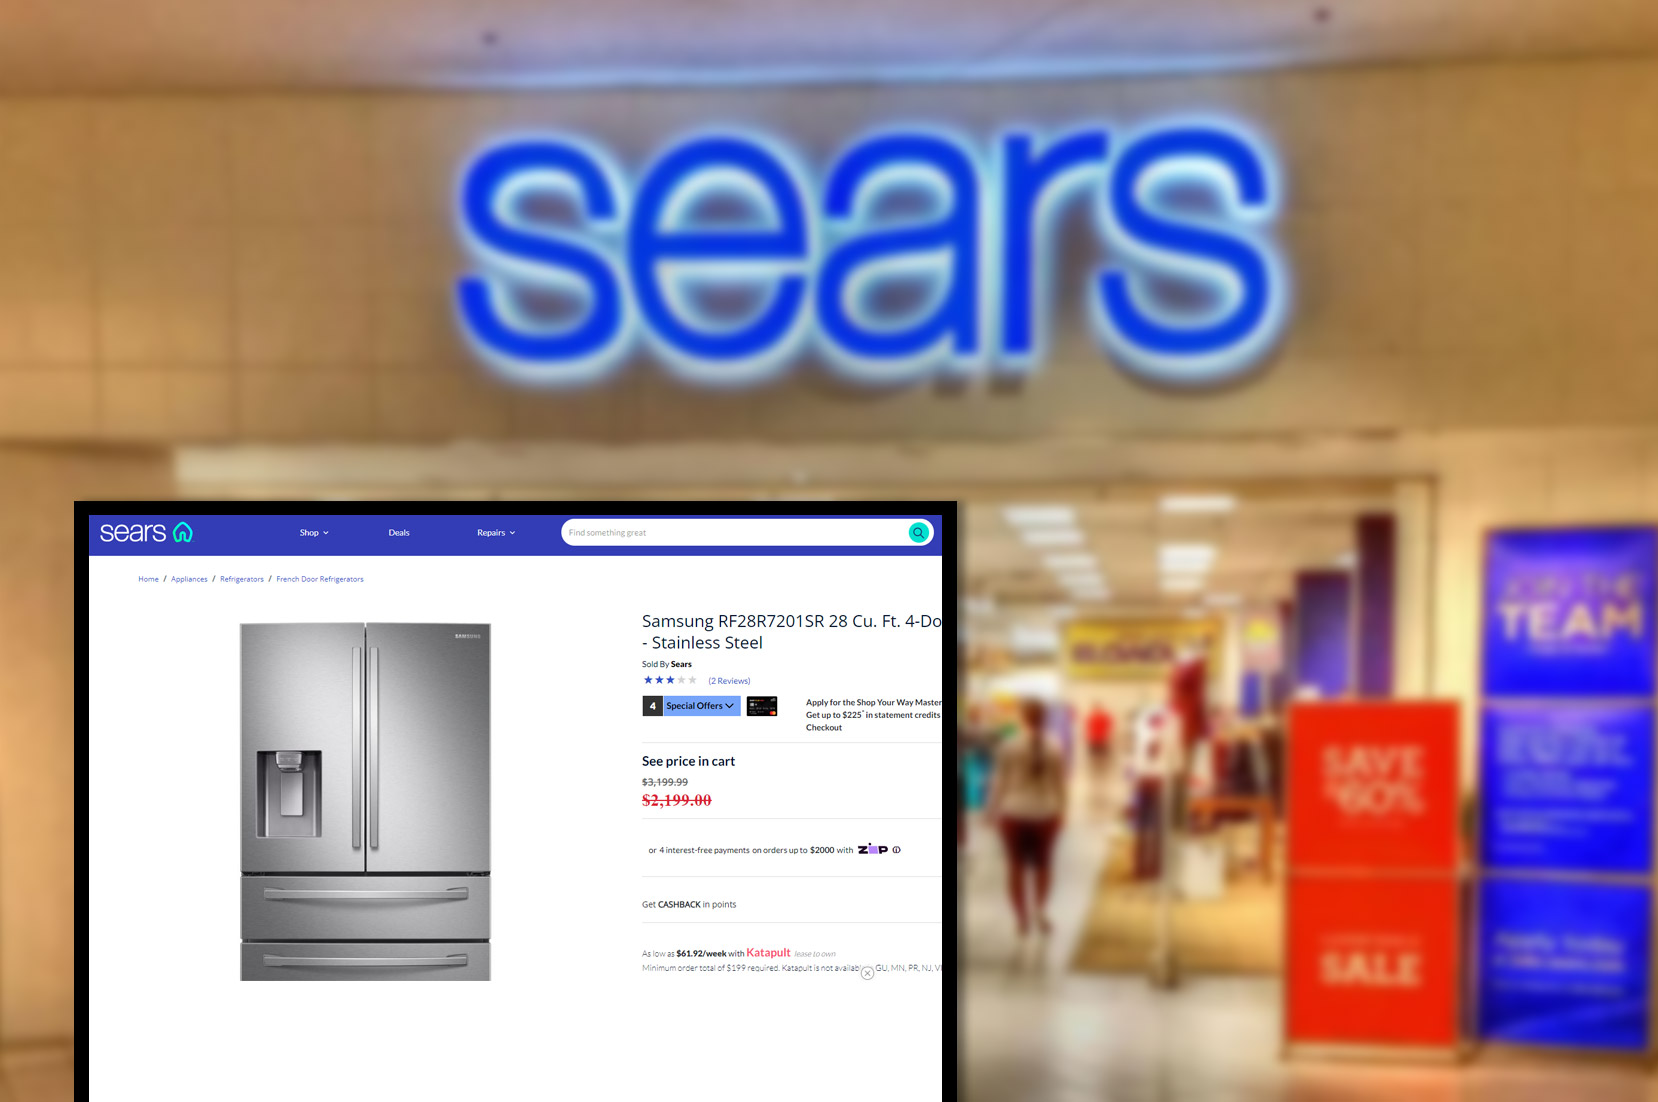 sears-comproduct-pricing-information-and-image-scraping-services